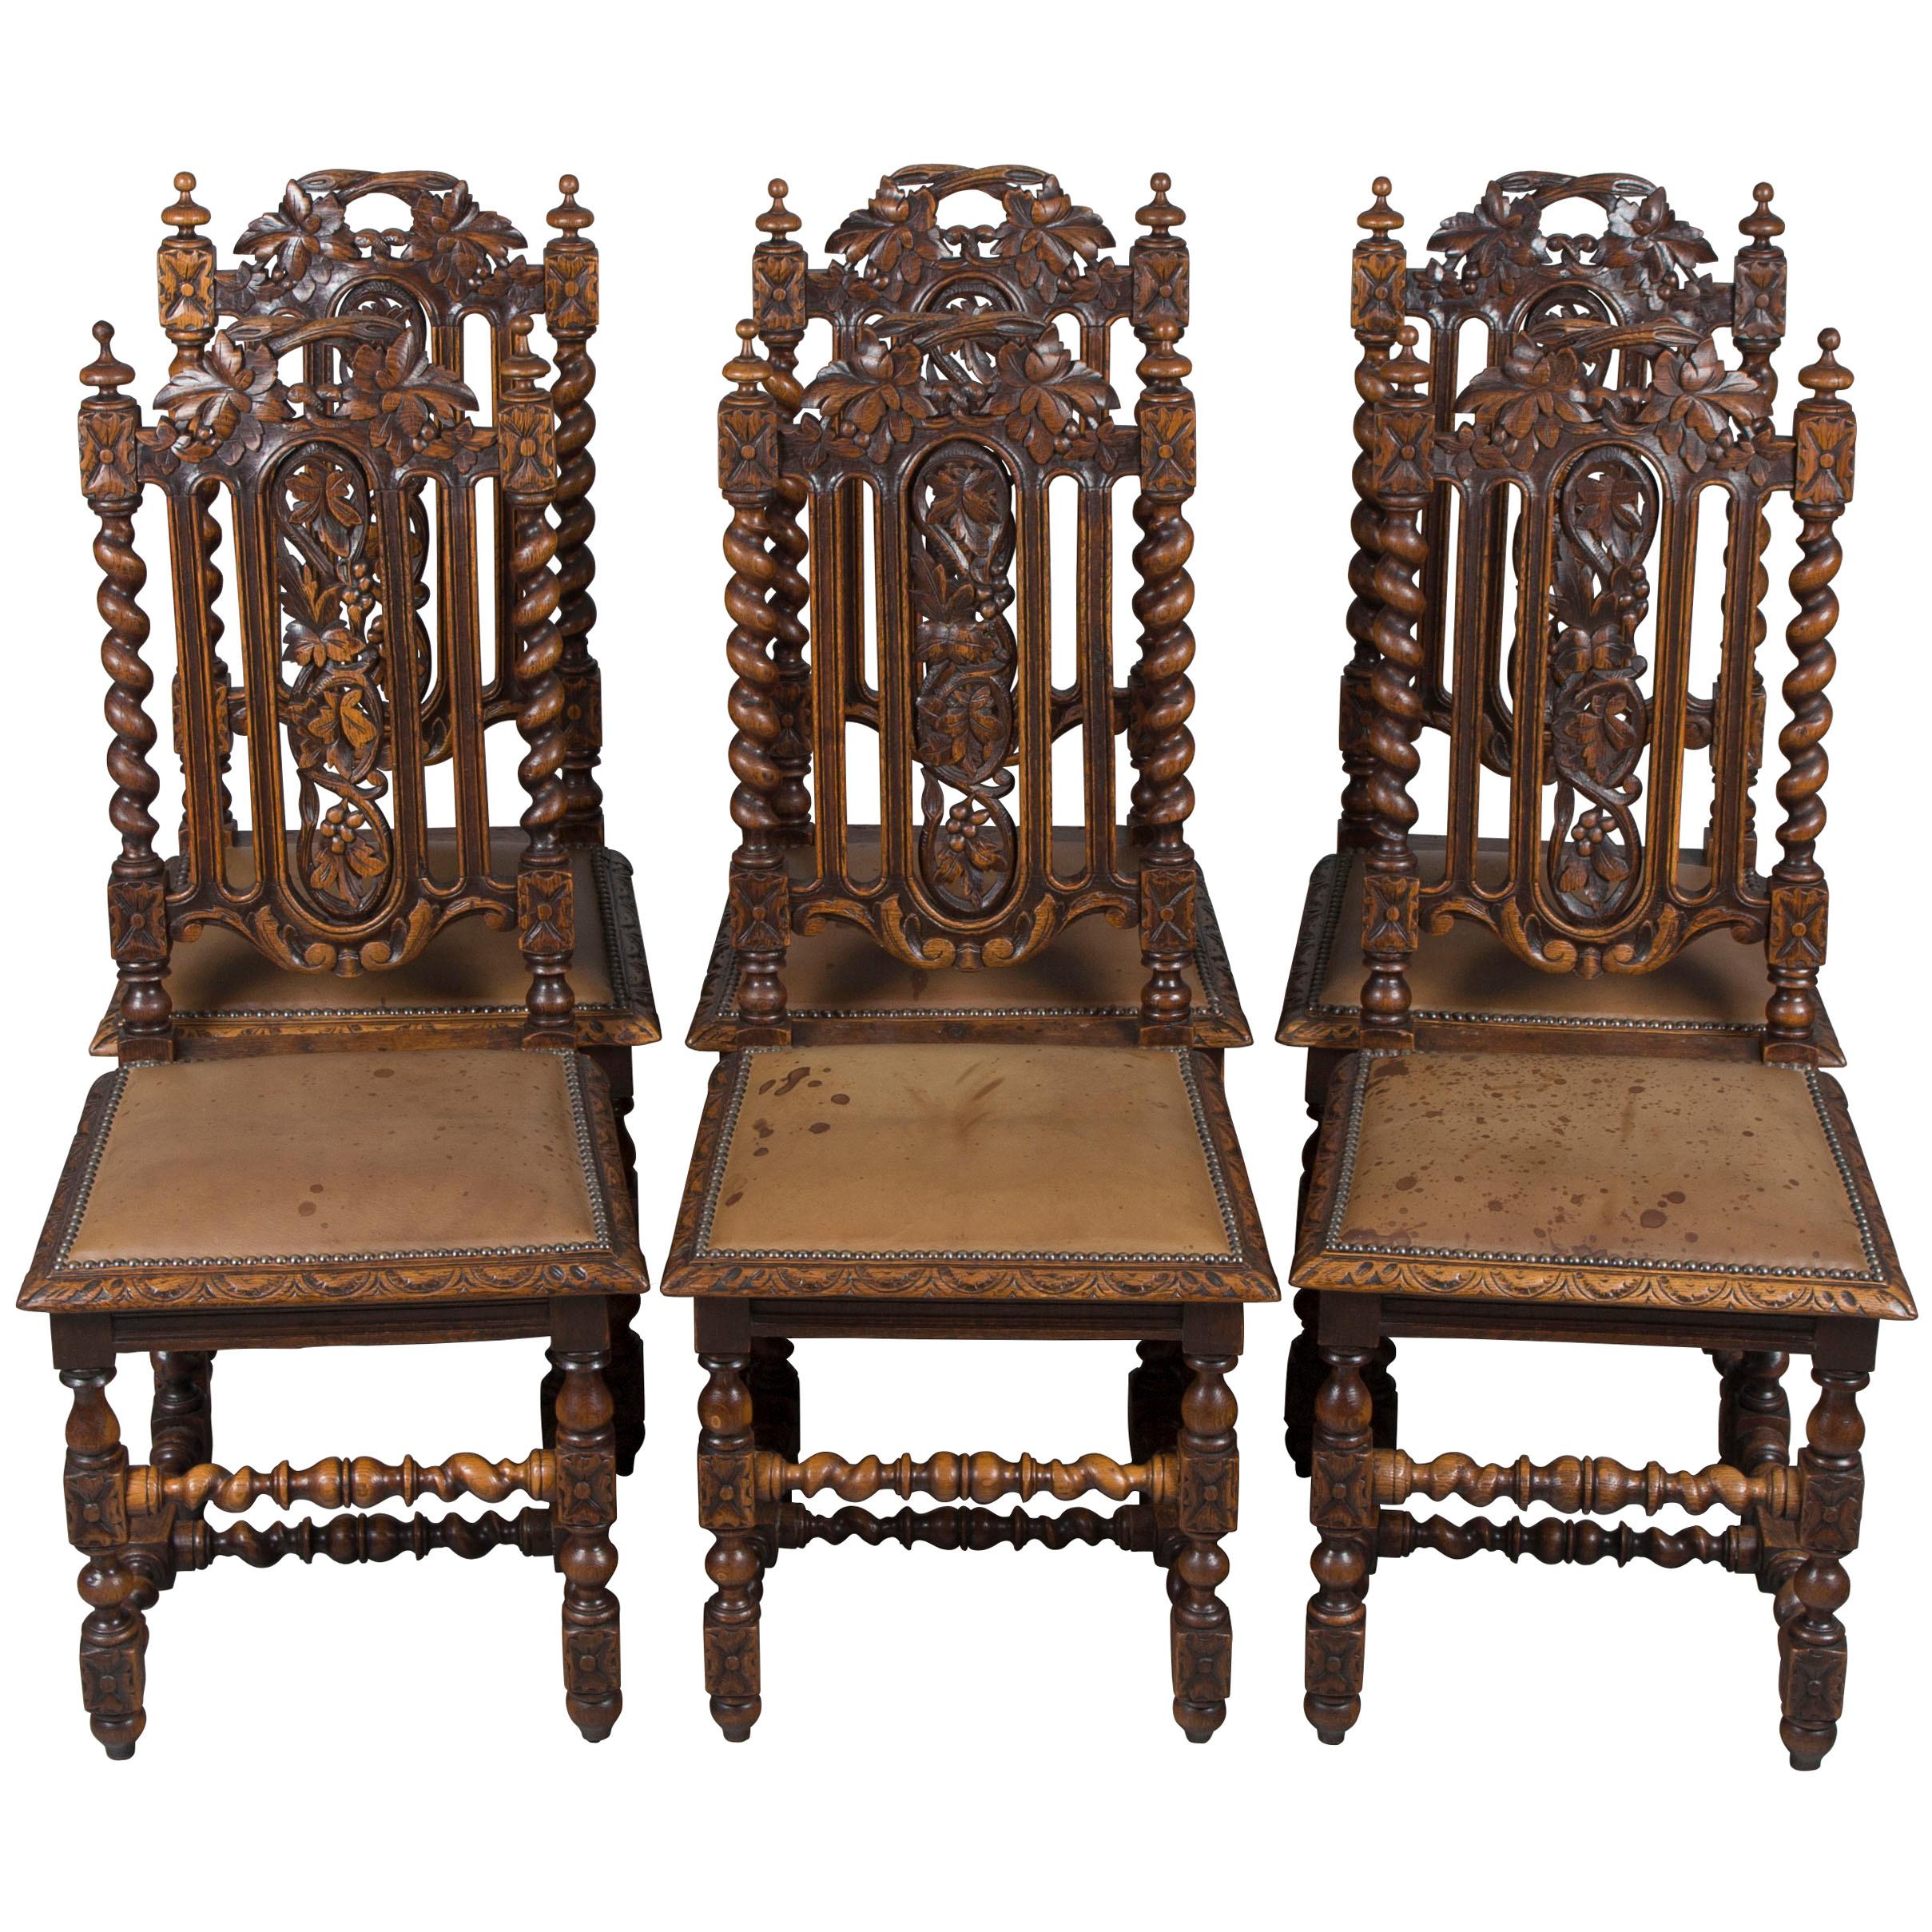 Carved Oak French Provincial Set of Six Dining Room Chairs